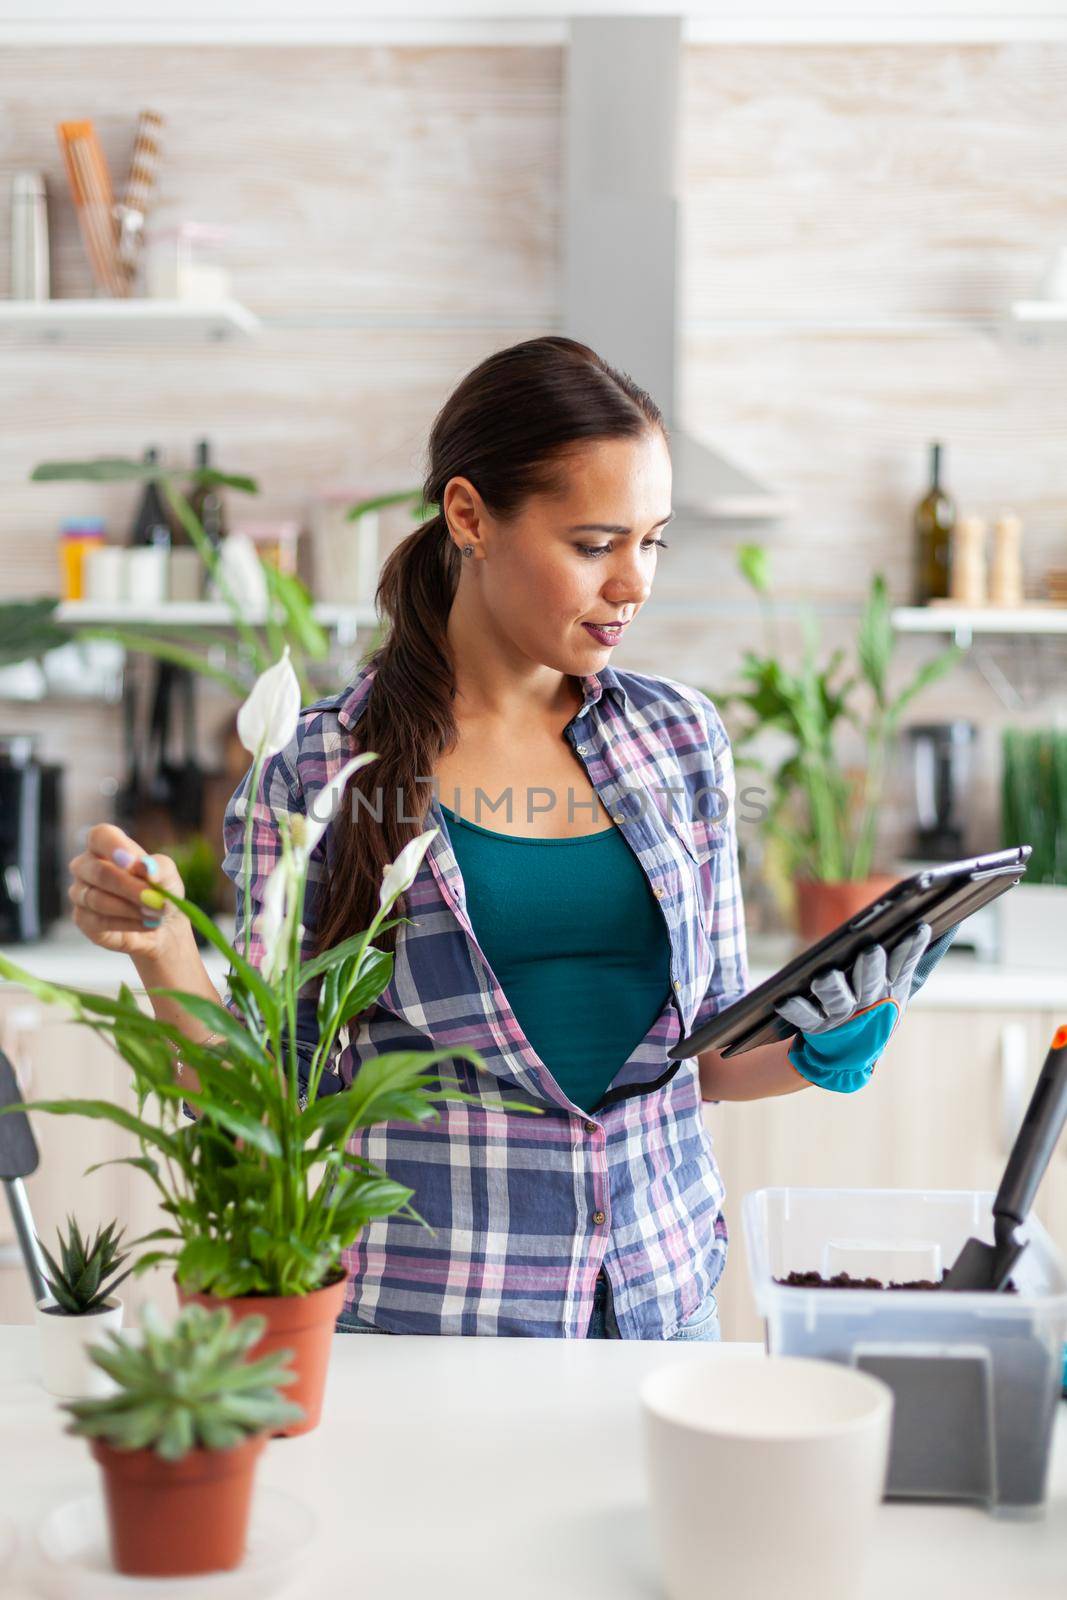 Woman reading about gardening on tablet pc in home kitchen. Decorative, plants, growing, lifestyle, design, botanica, dirt, domestic, growh, leaf, hobby, seeding, care, happy, green, natural,